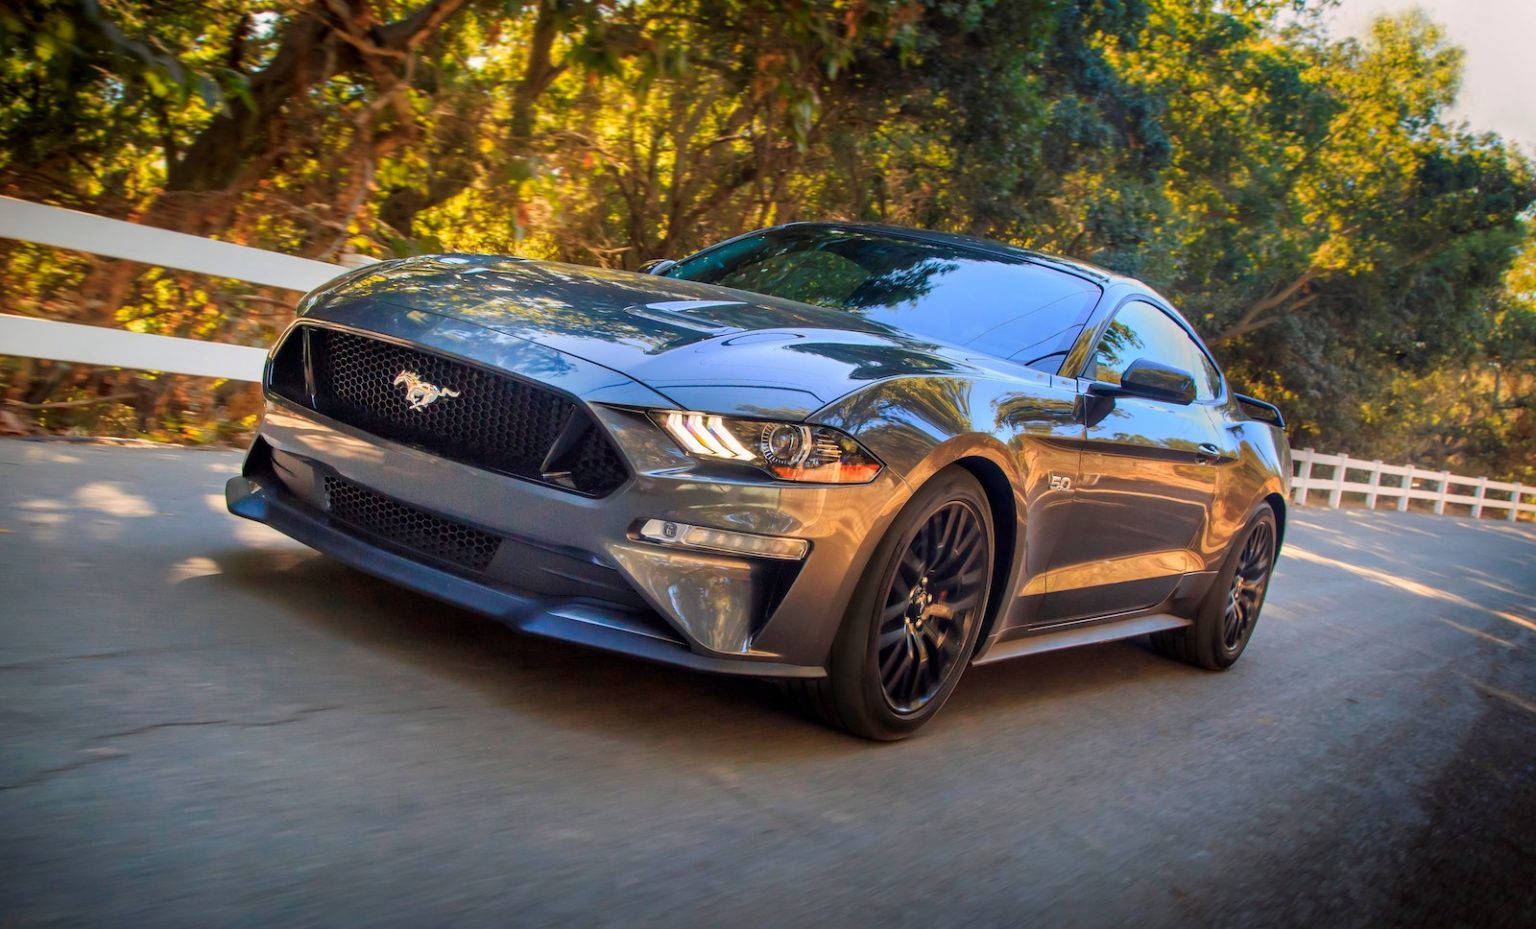 Ford Mustang Getting Hybrid Option in 2025 - The Detroit Bureau